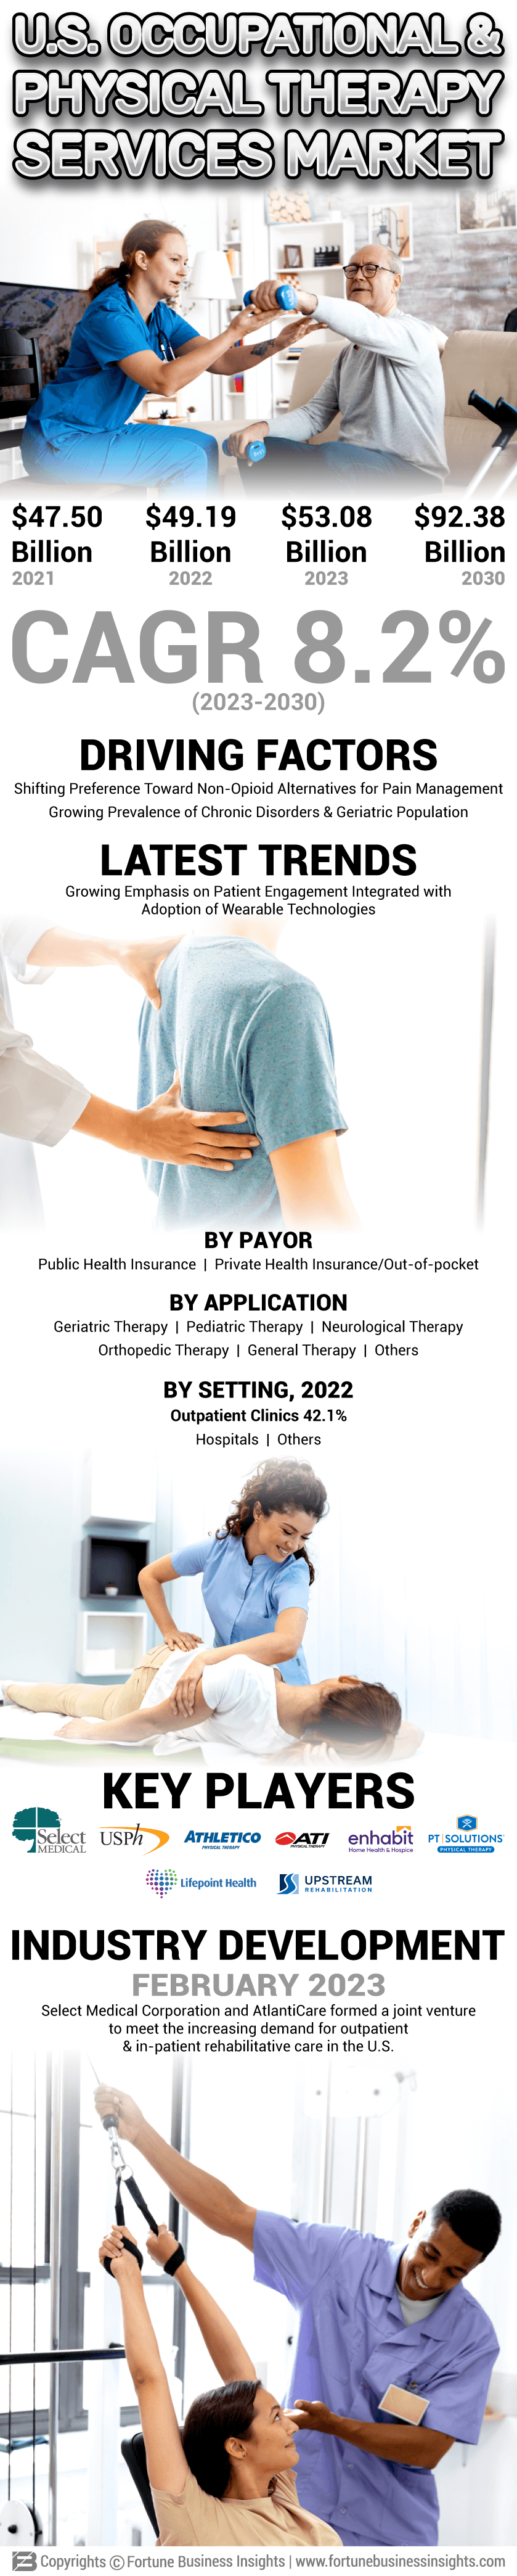 U.S. Occupational & Physical Therapy Services Market